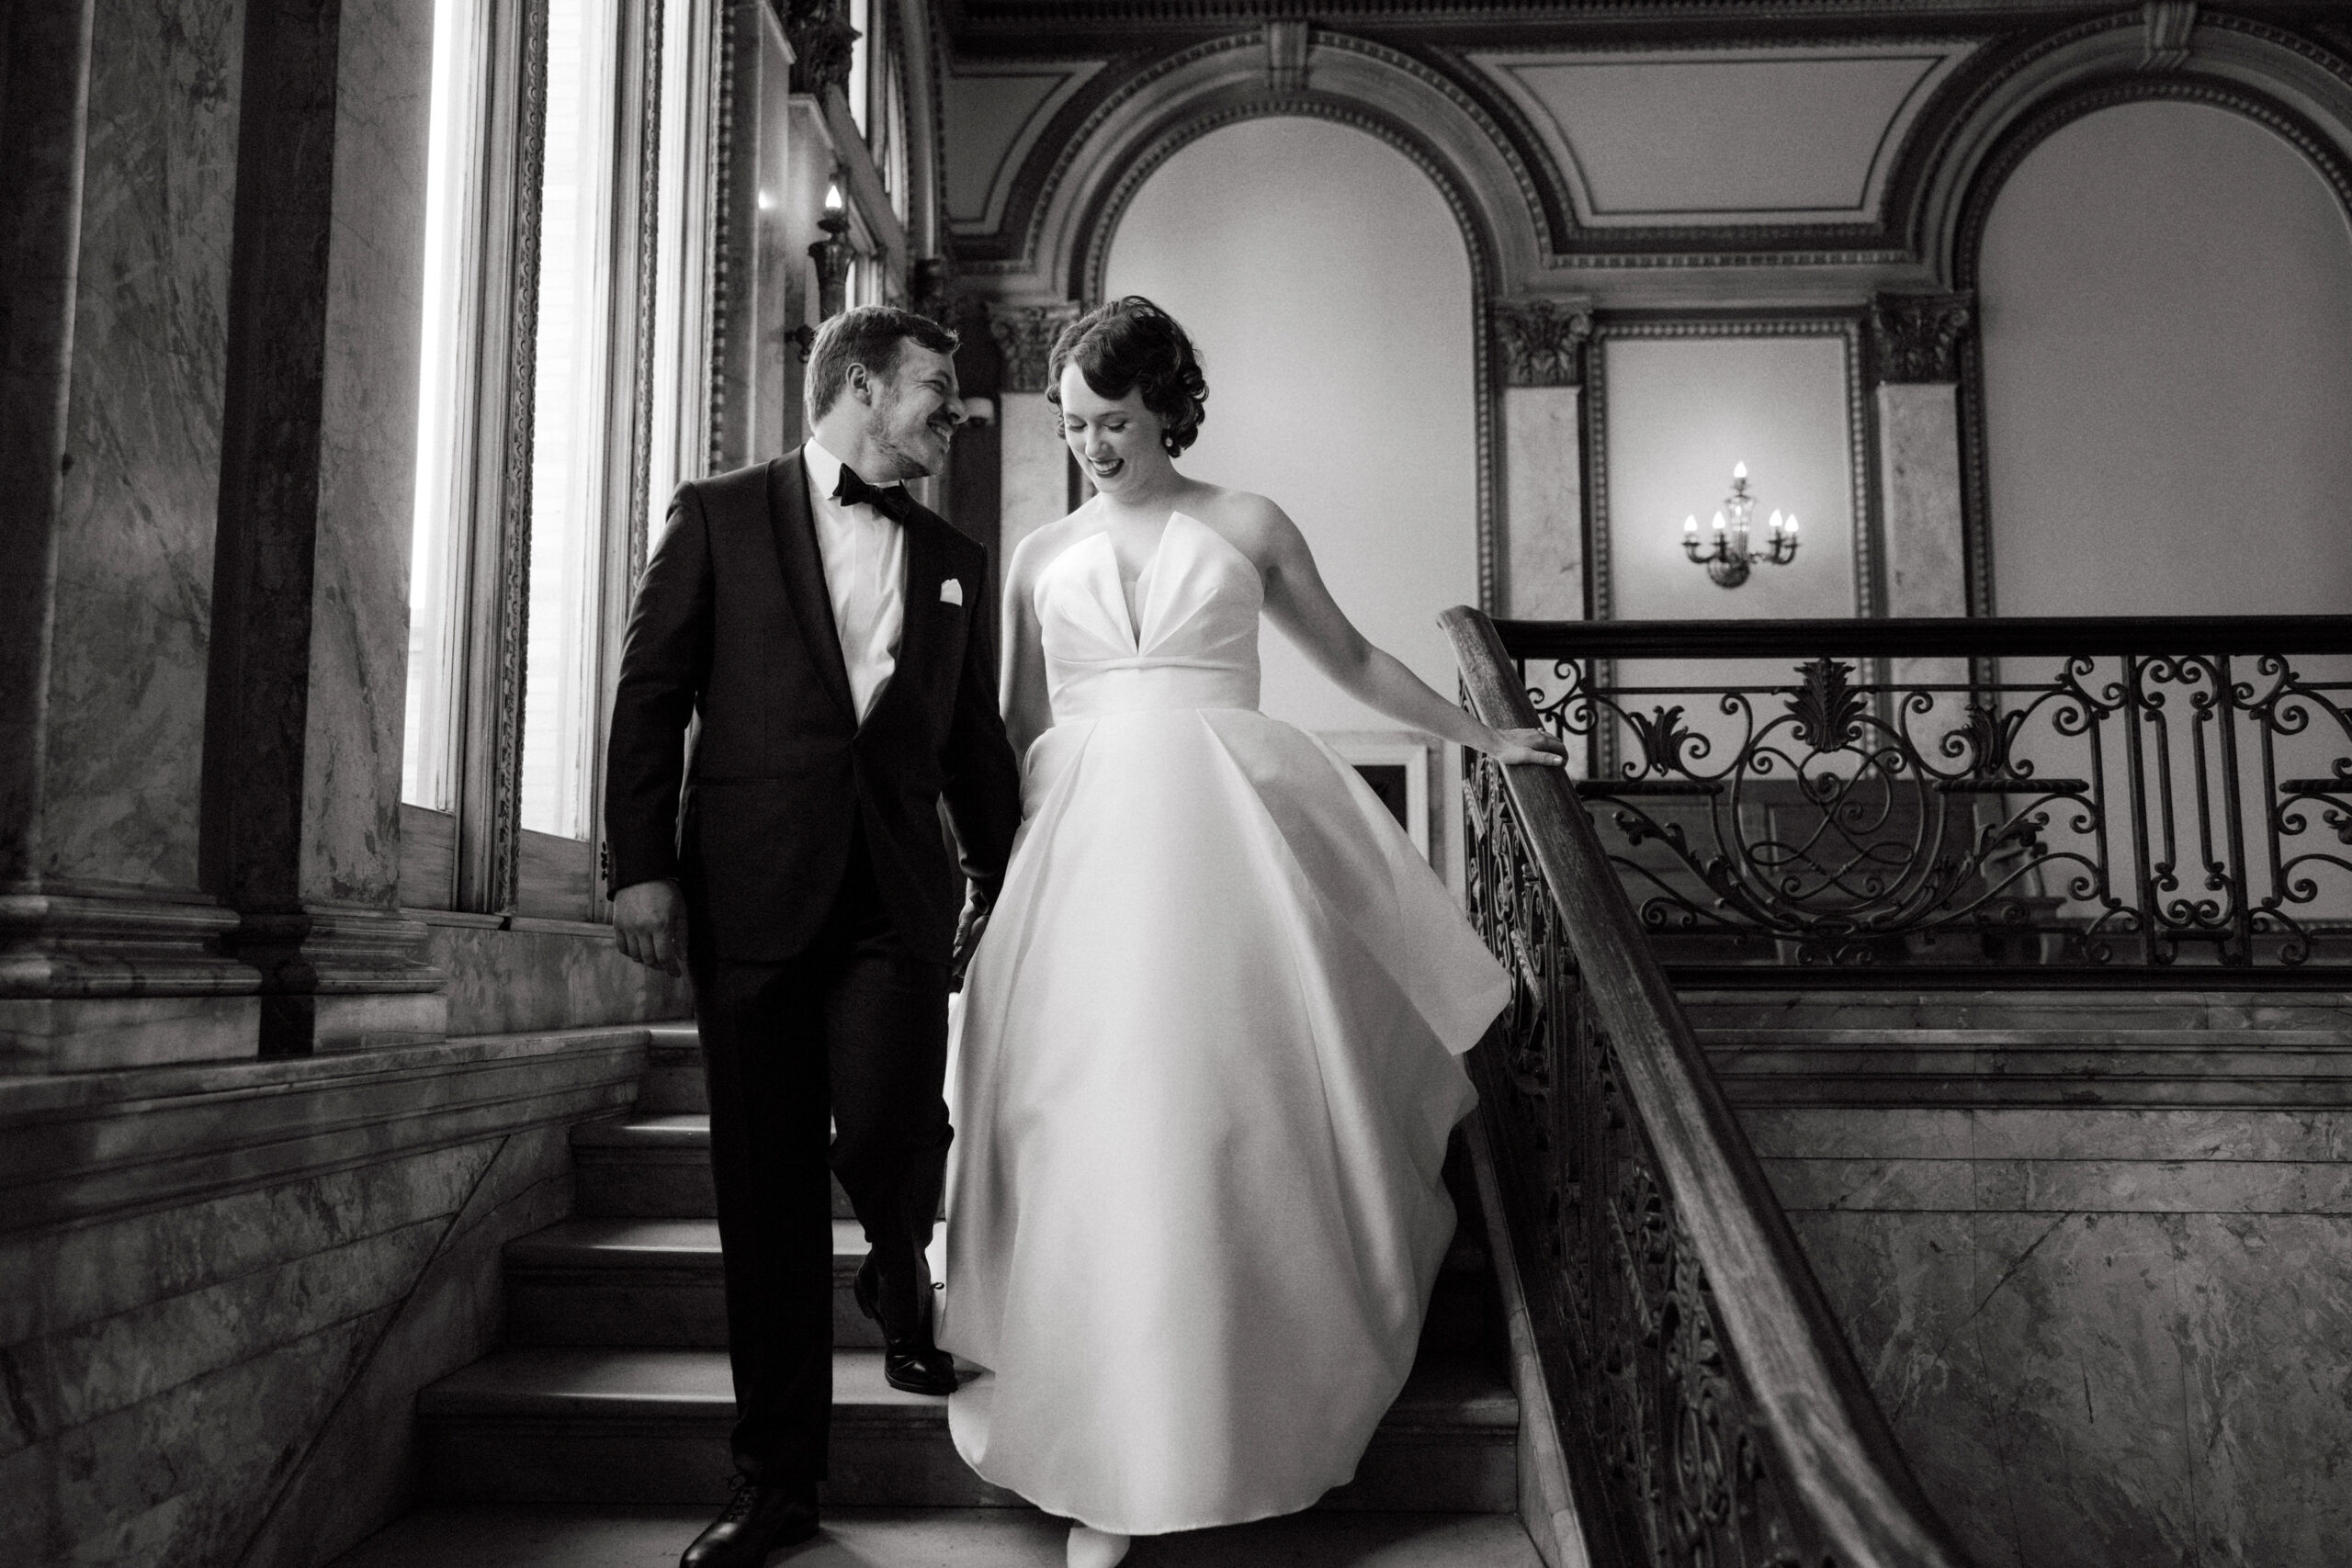 Black and white image of the  bride and groom walking down the staircase. Wedding poses image by Jenny Fu Studio